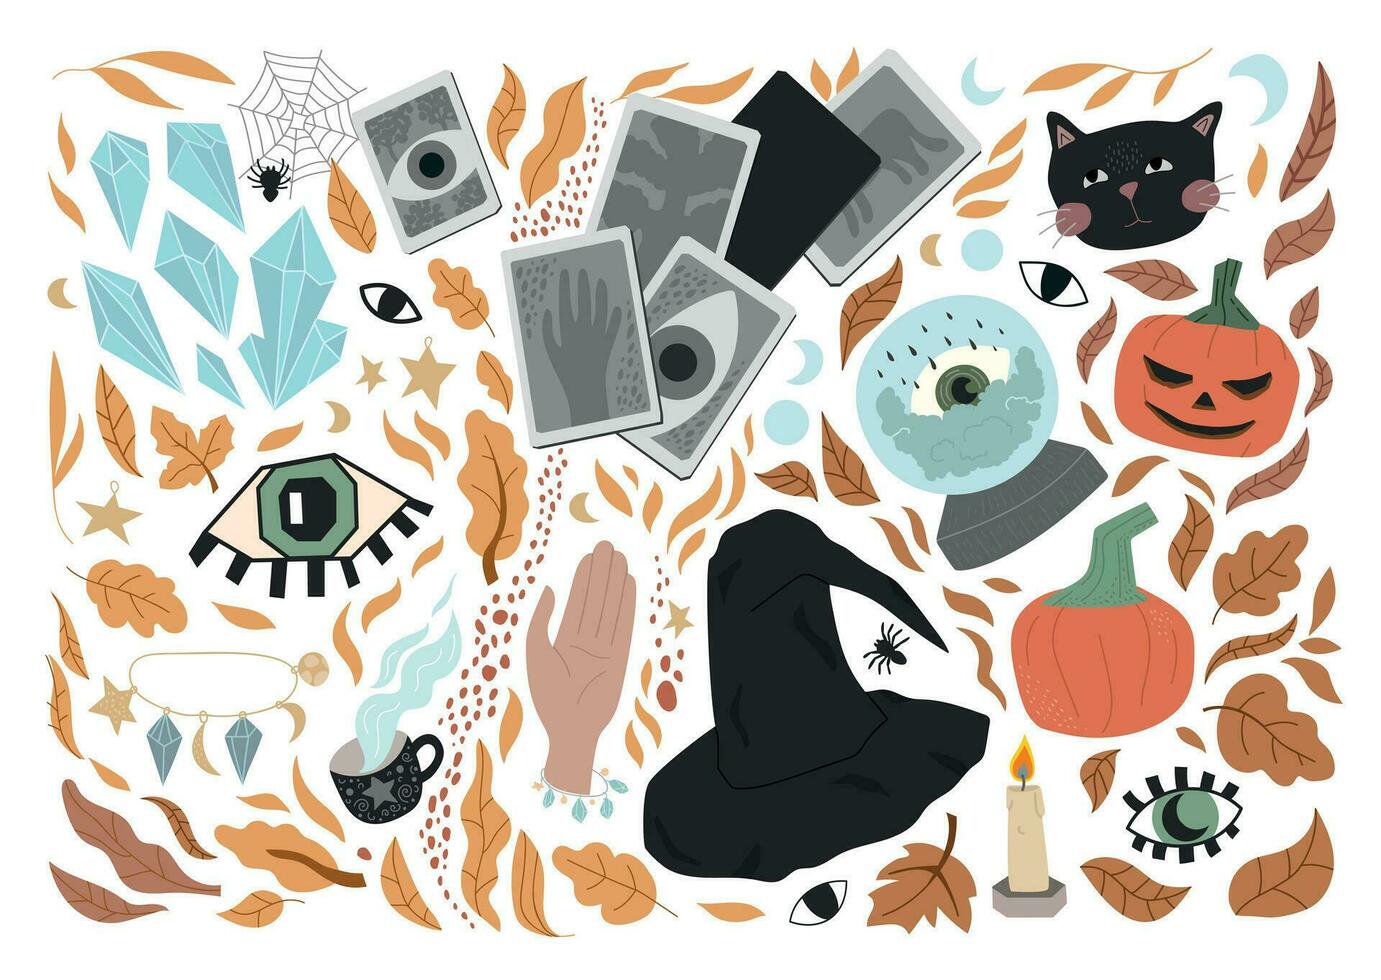 big set of cute Halloween stickers - black cat, eyes, witch hat, pumpkins, spiders, fortune telling ball, cards, crystals, autumn leaves. flat illustration. for a postcard, poster or any design. vector